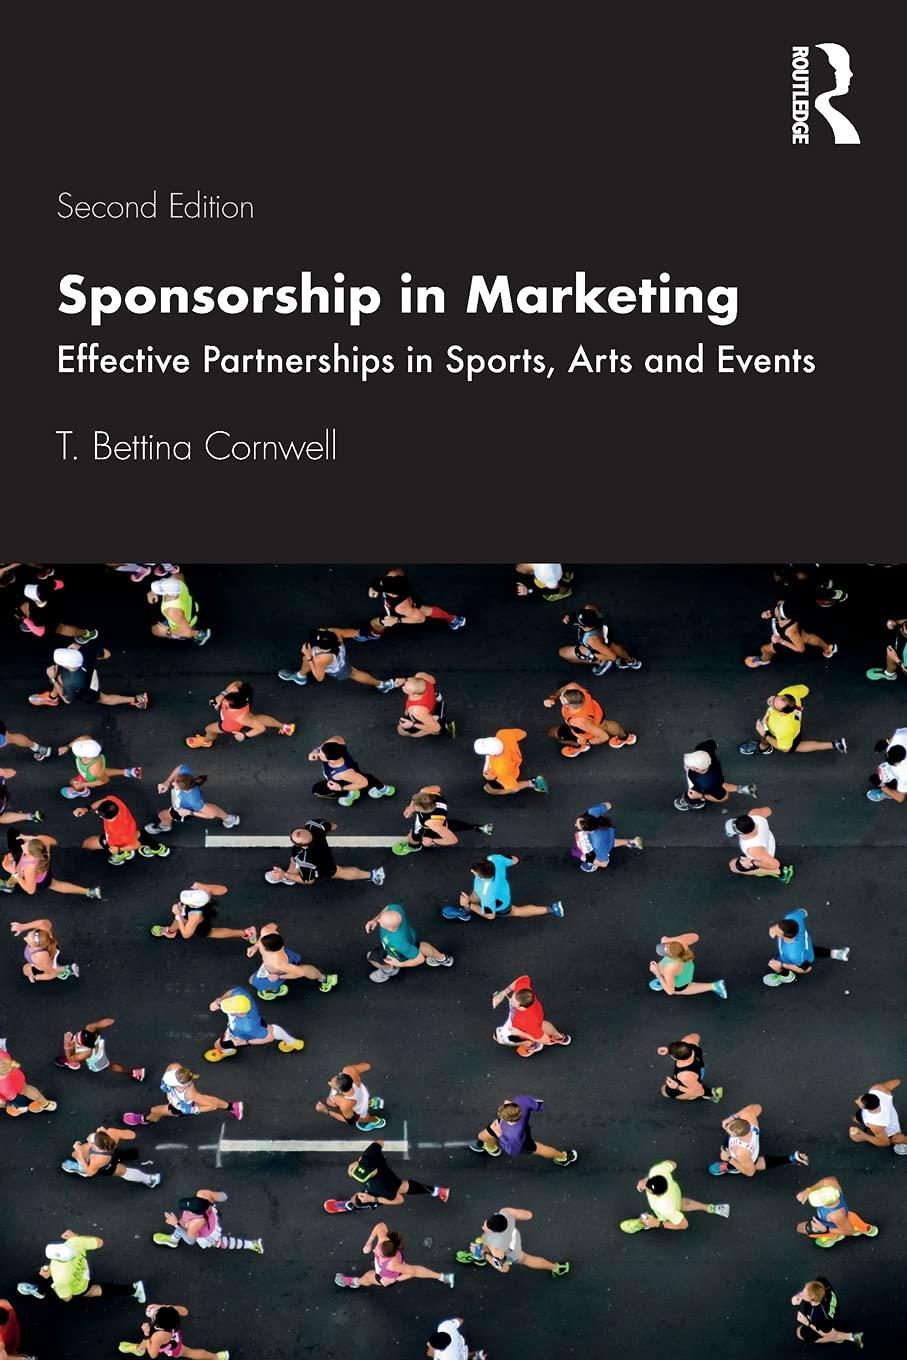 sponsorship in marketing  effective partnerships in sports, arts and events 2nd edition t. bettina cornwell